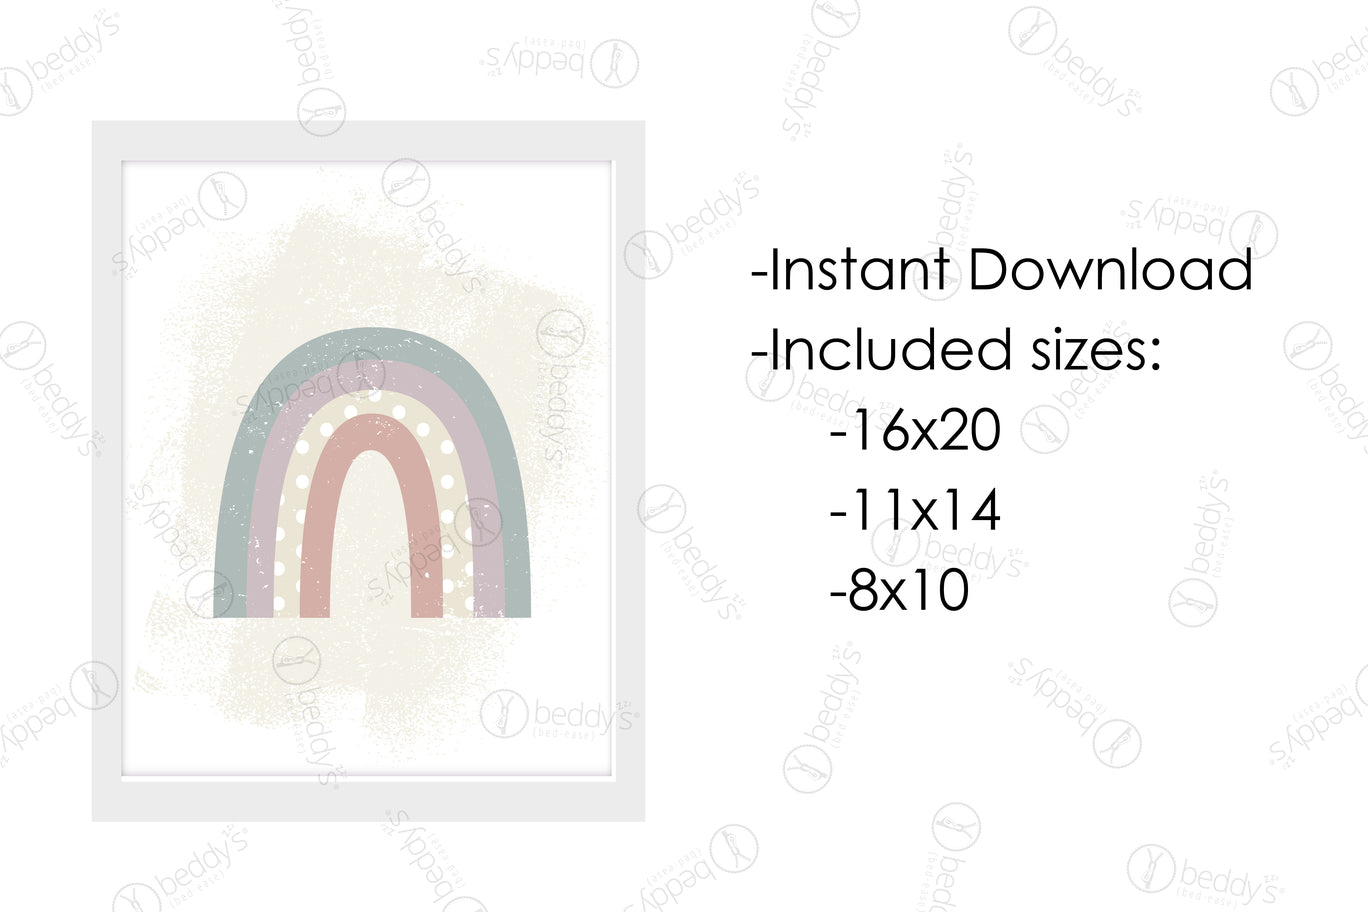 Rainbow artwork download available in 16x20,11x14 and 8x10